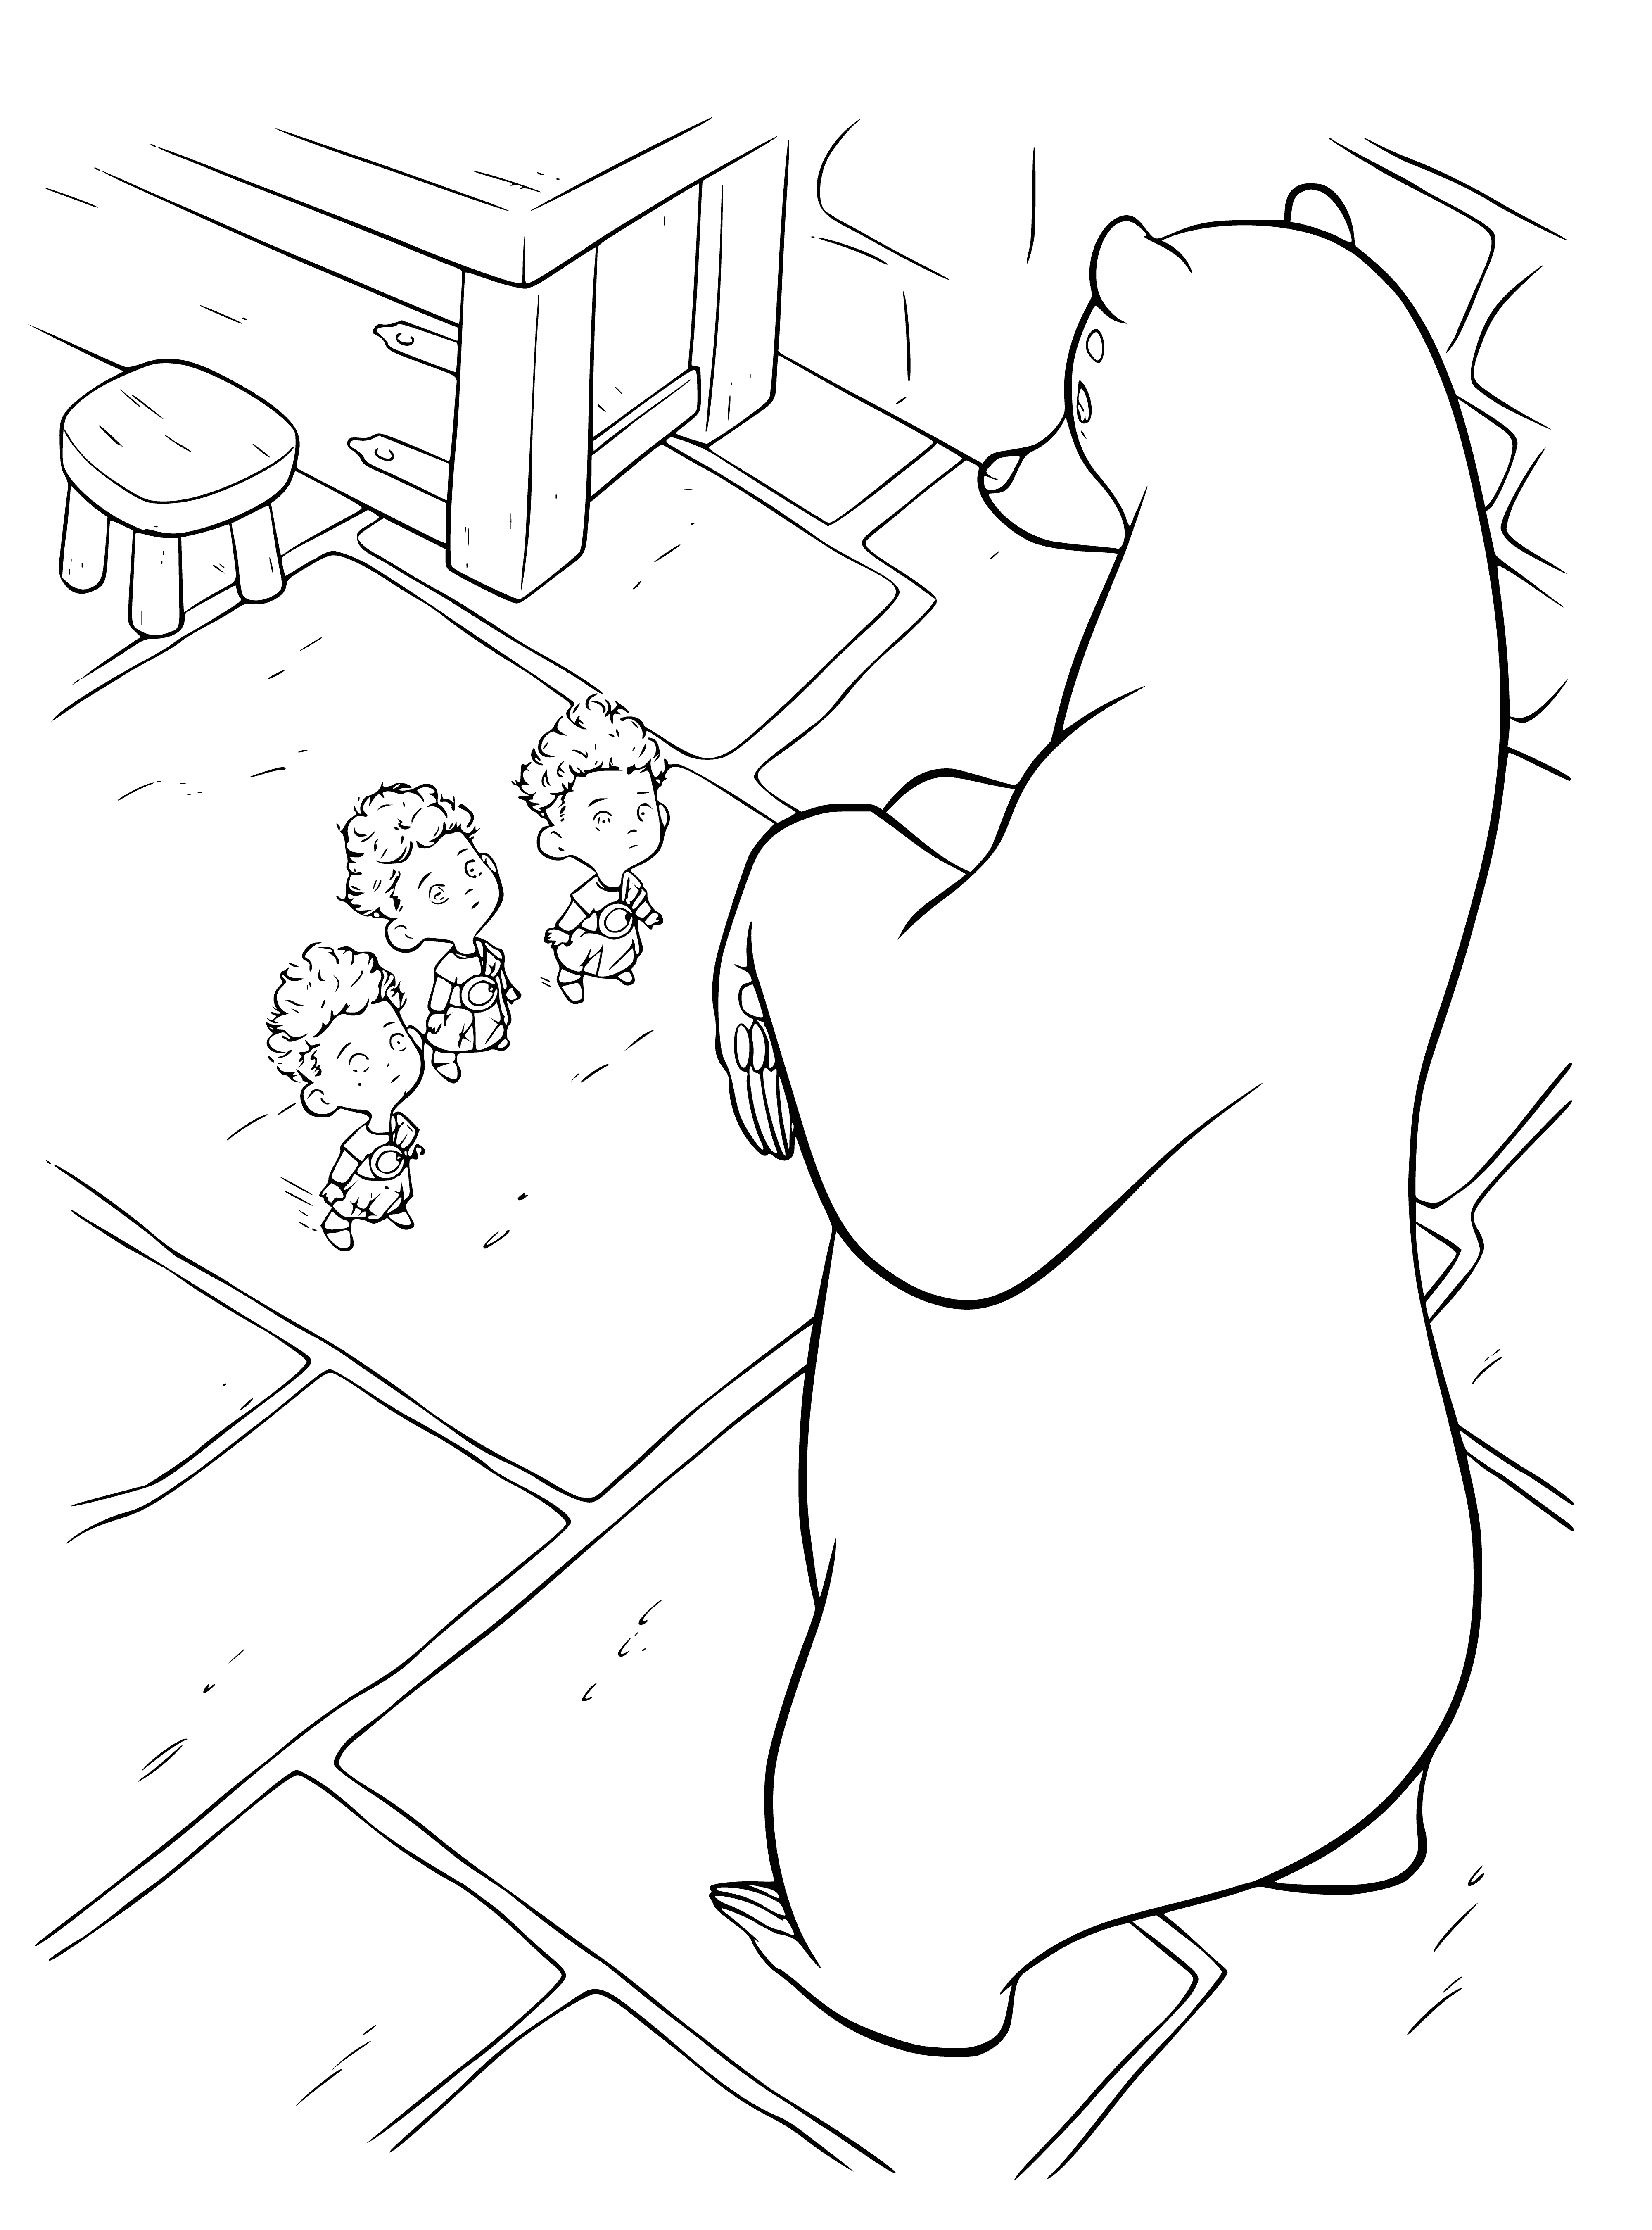 The she-bear meets three boys coloring page